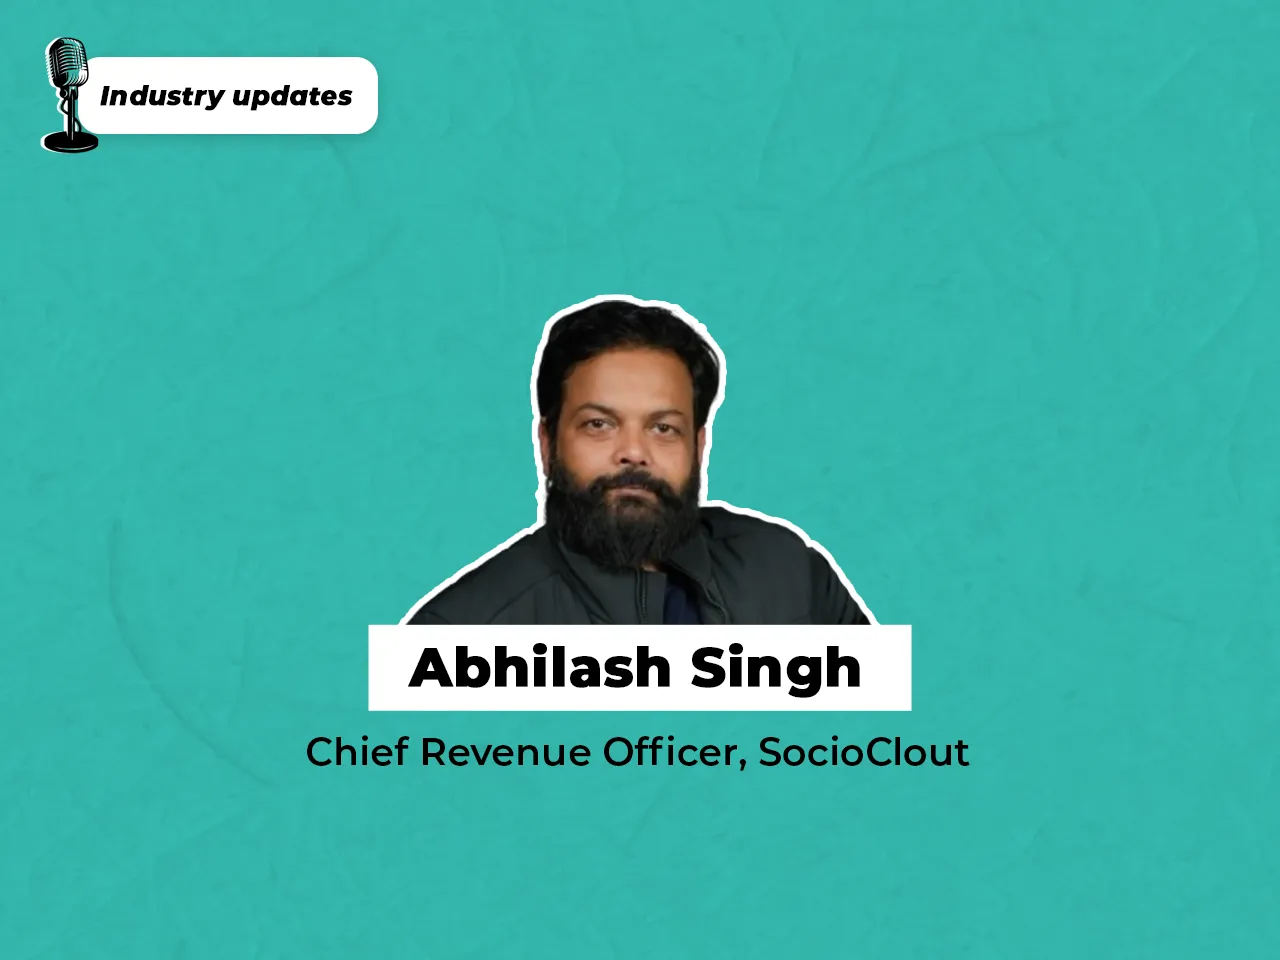 SocioClout appoints Abhilash Singh as Chief Revenue Officer